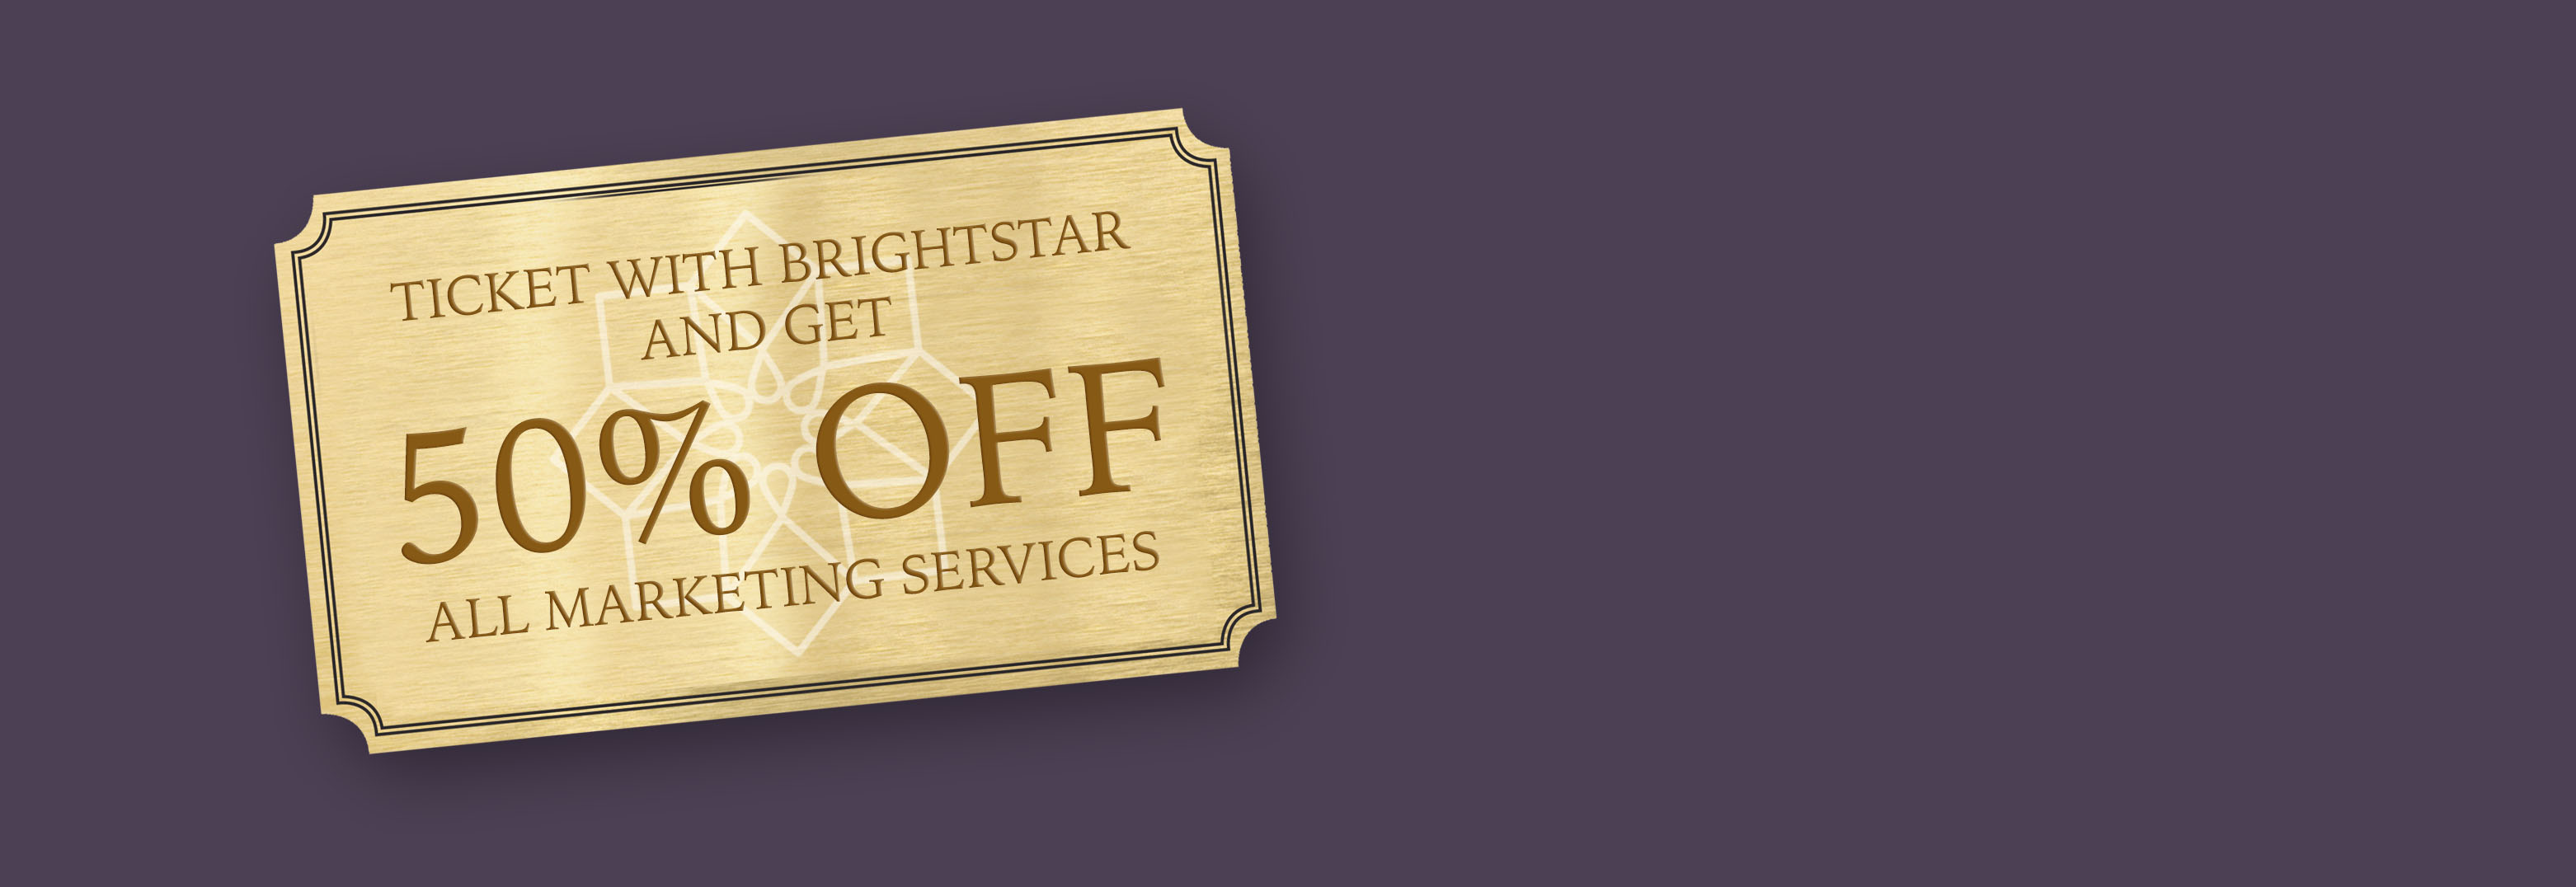 Brightstar Ticket Sales And Event Management Software 